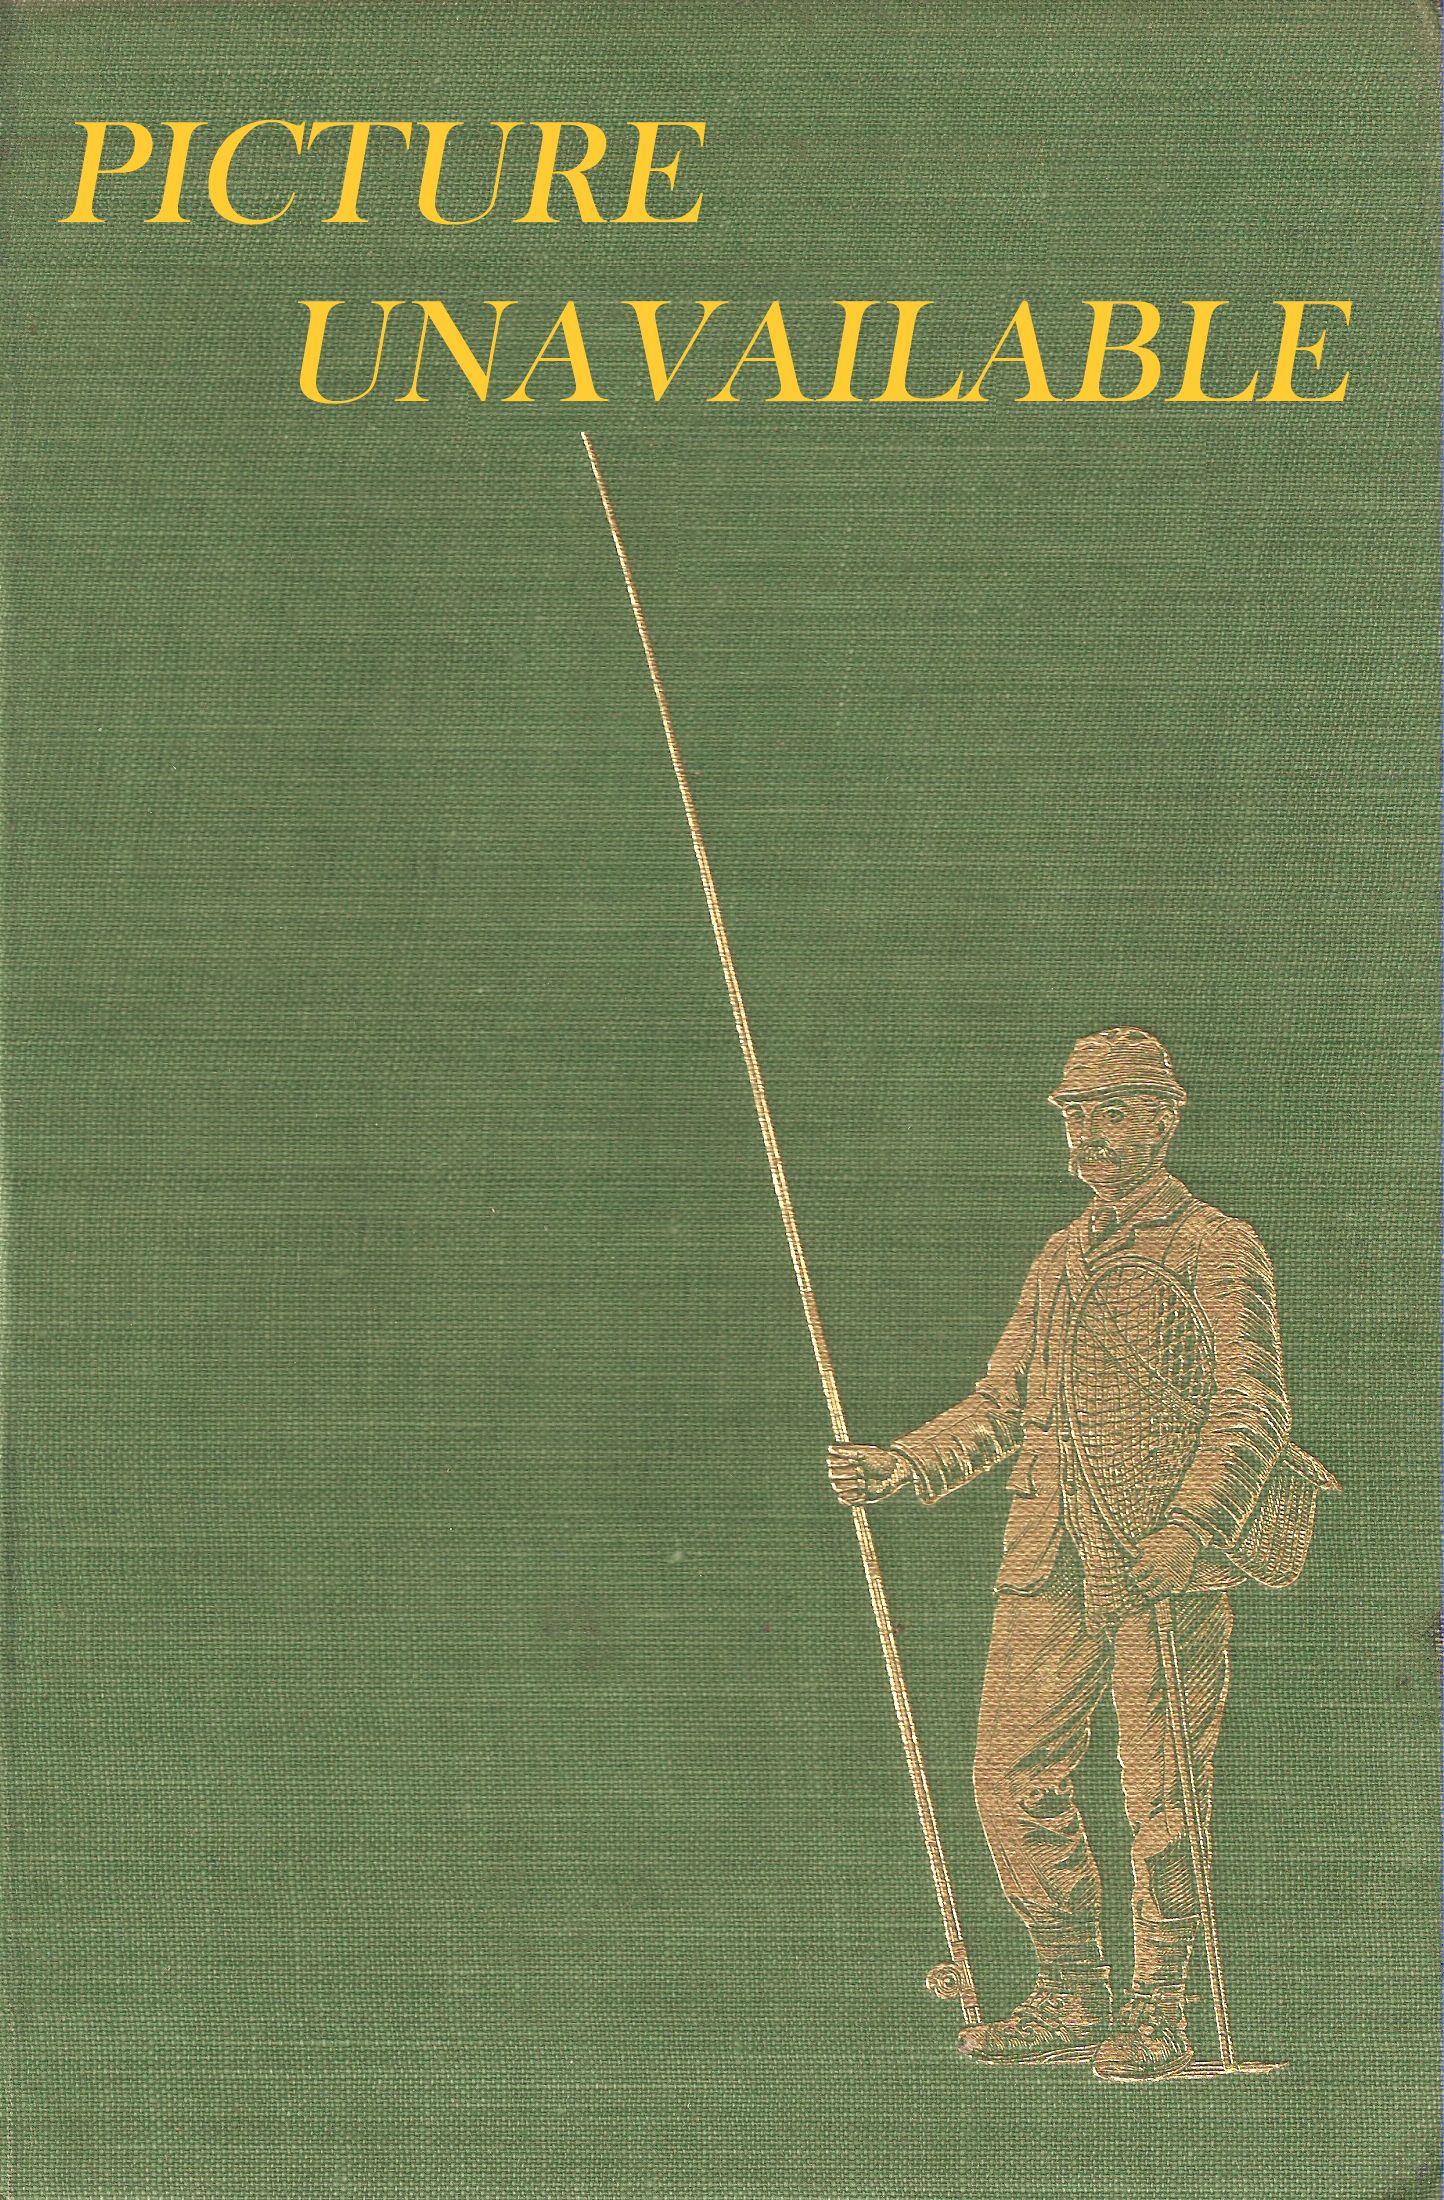 THE SPORTING RIFLE: A USER'S HANDBOOK. By Robin Marshall-Ball. 1st Edition.